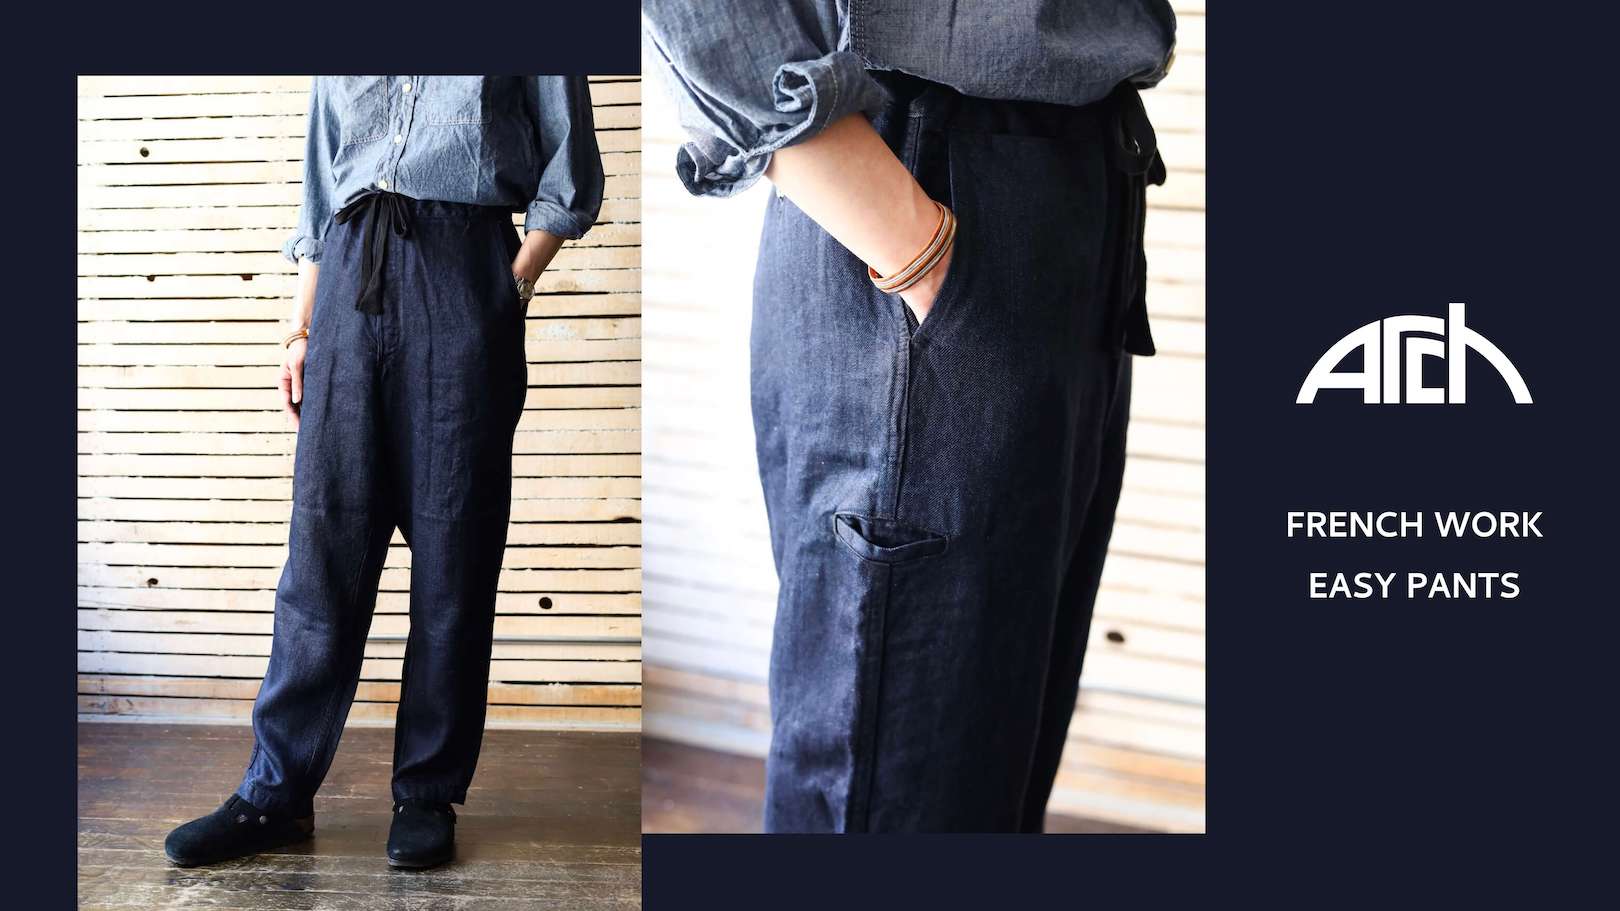 Arch FRENCH WORK EASY PANTS